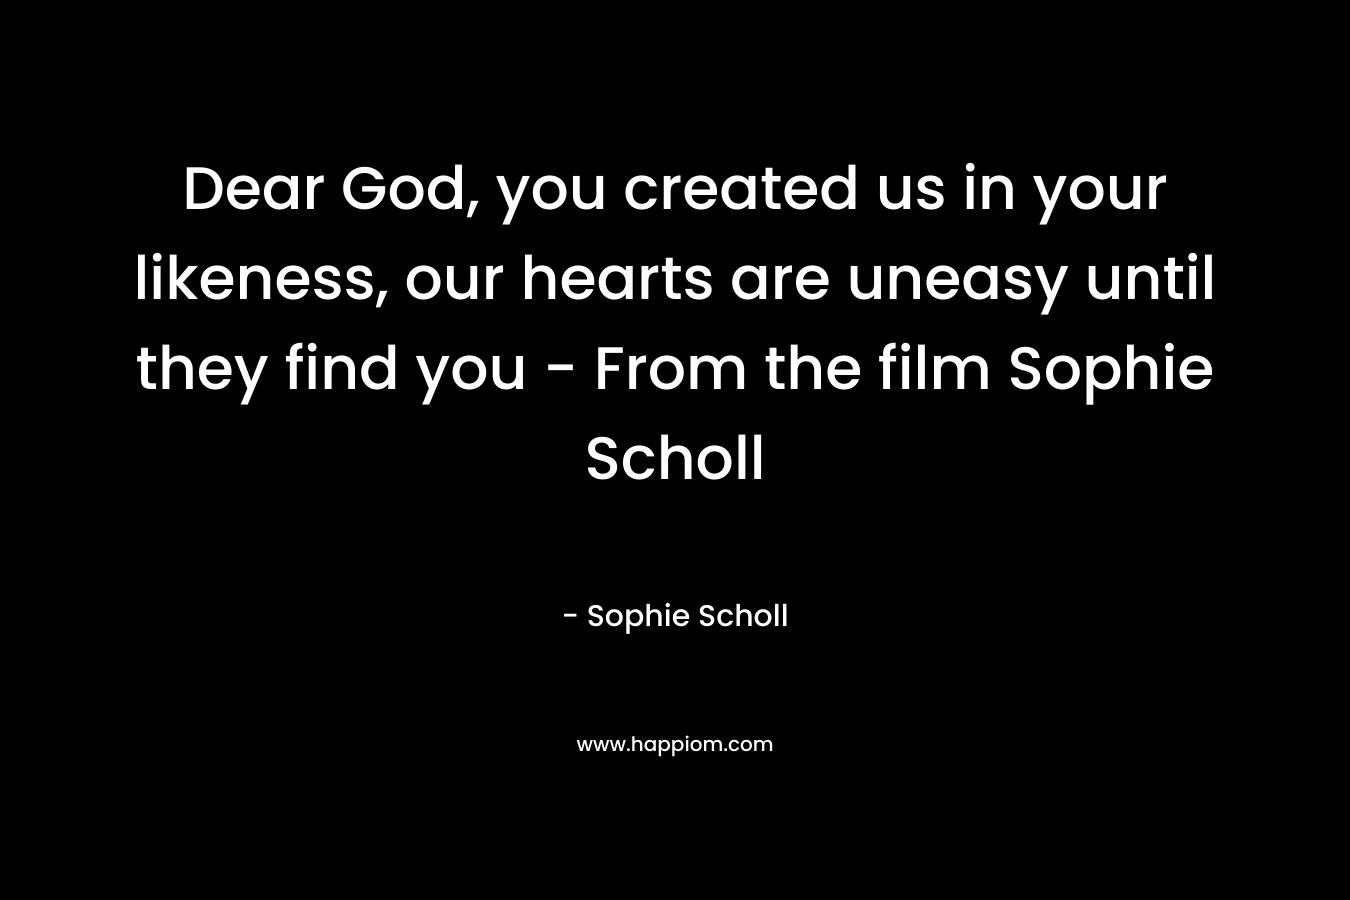 Dear God, you created us in your likeness, our hearts are uneasy until they find you – From the film Sophie Scholl – Sophie Scholl